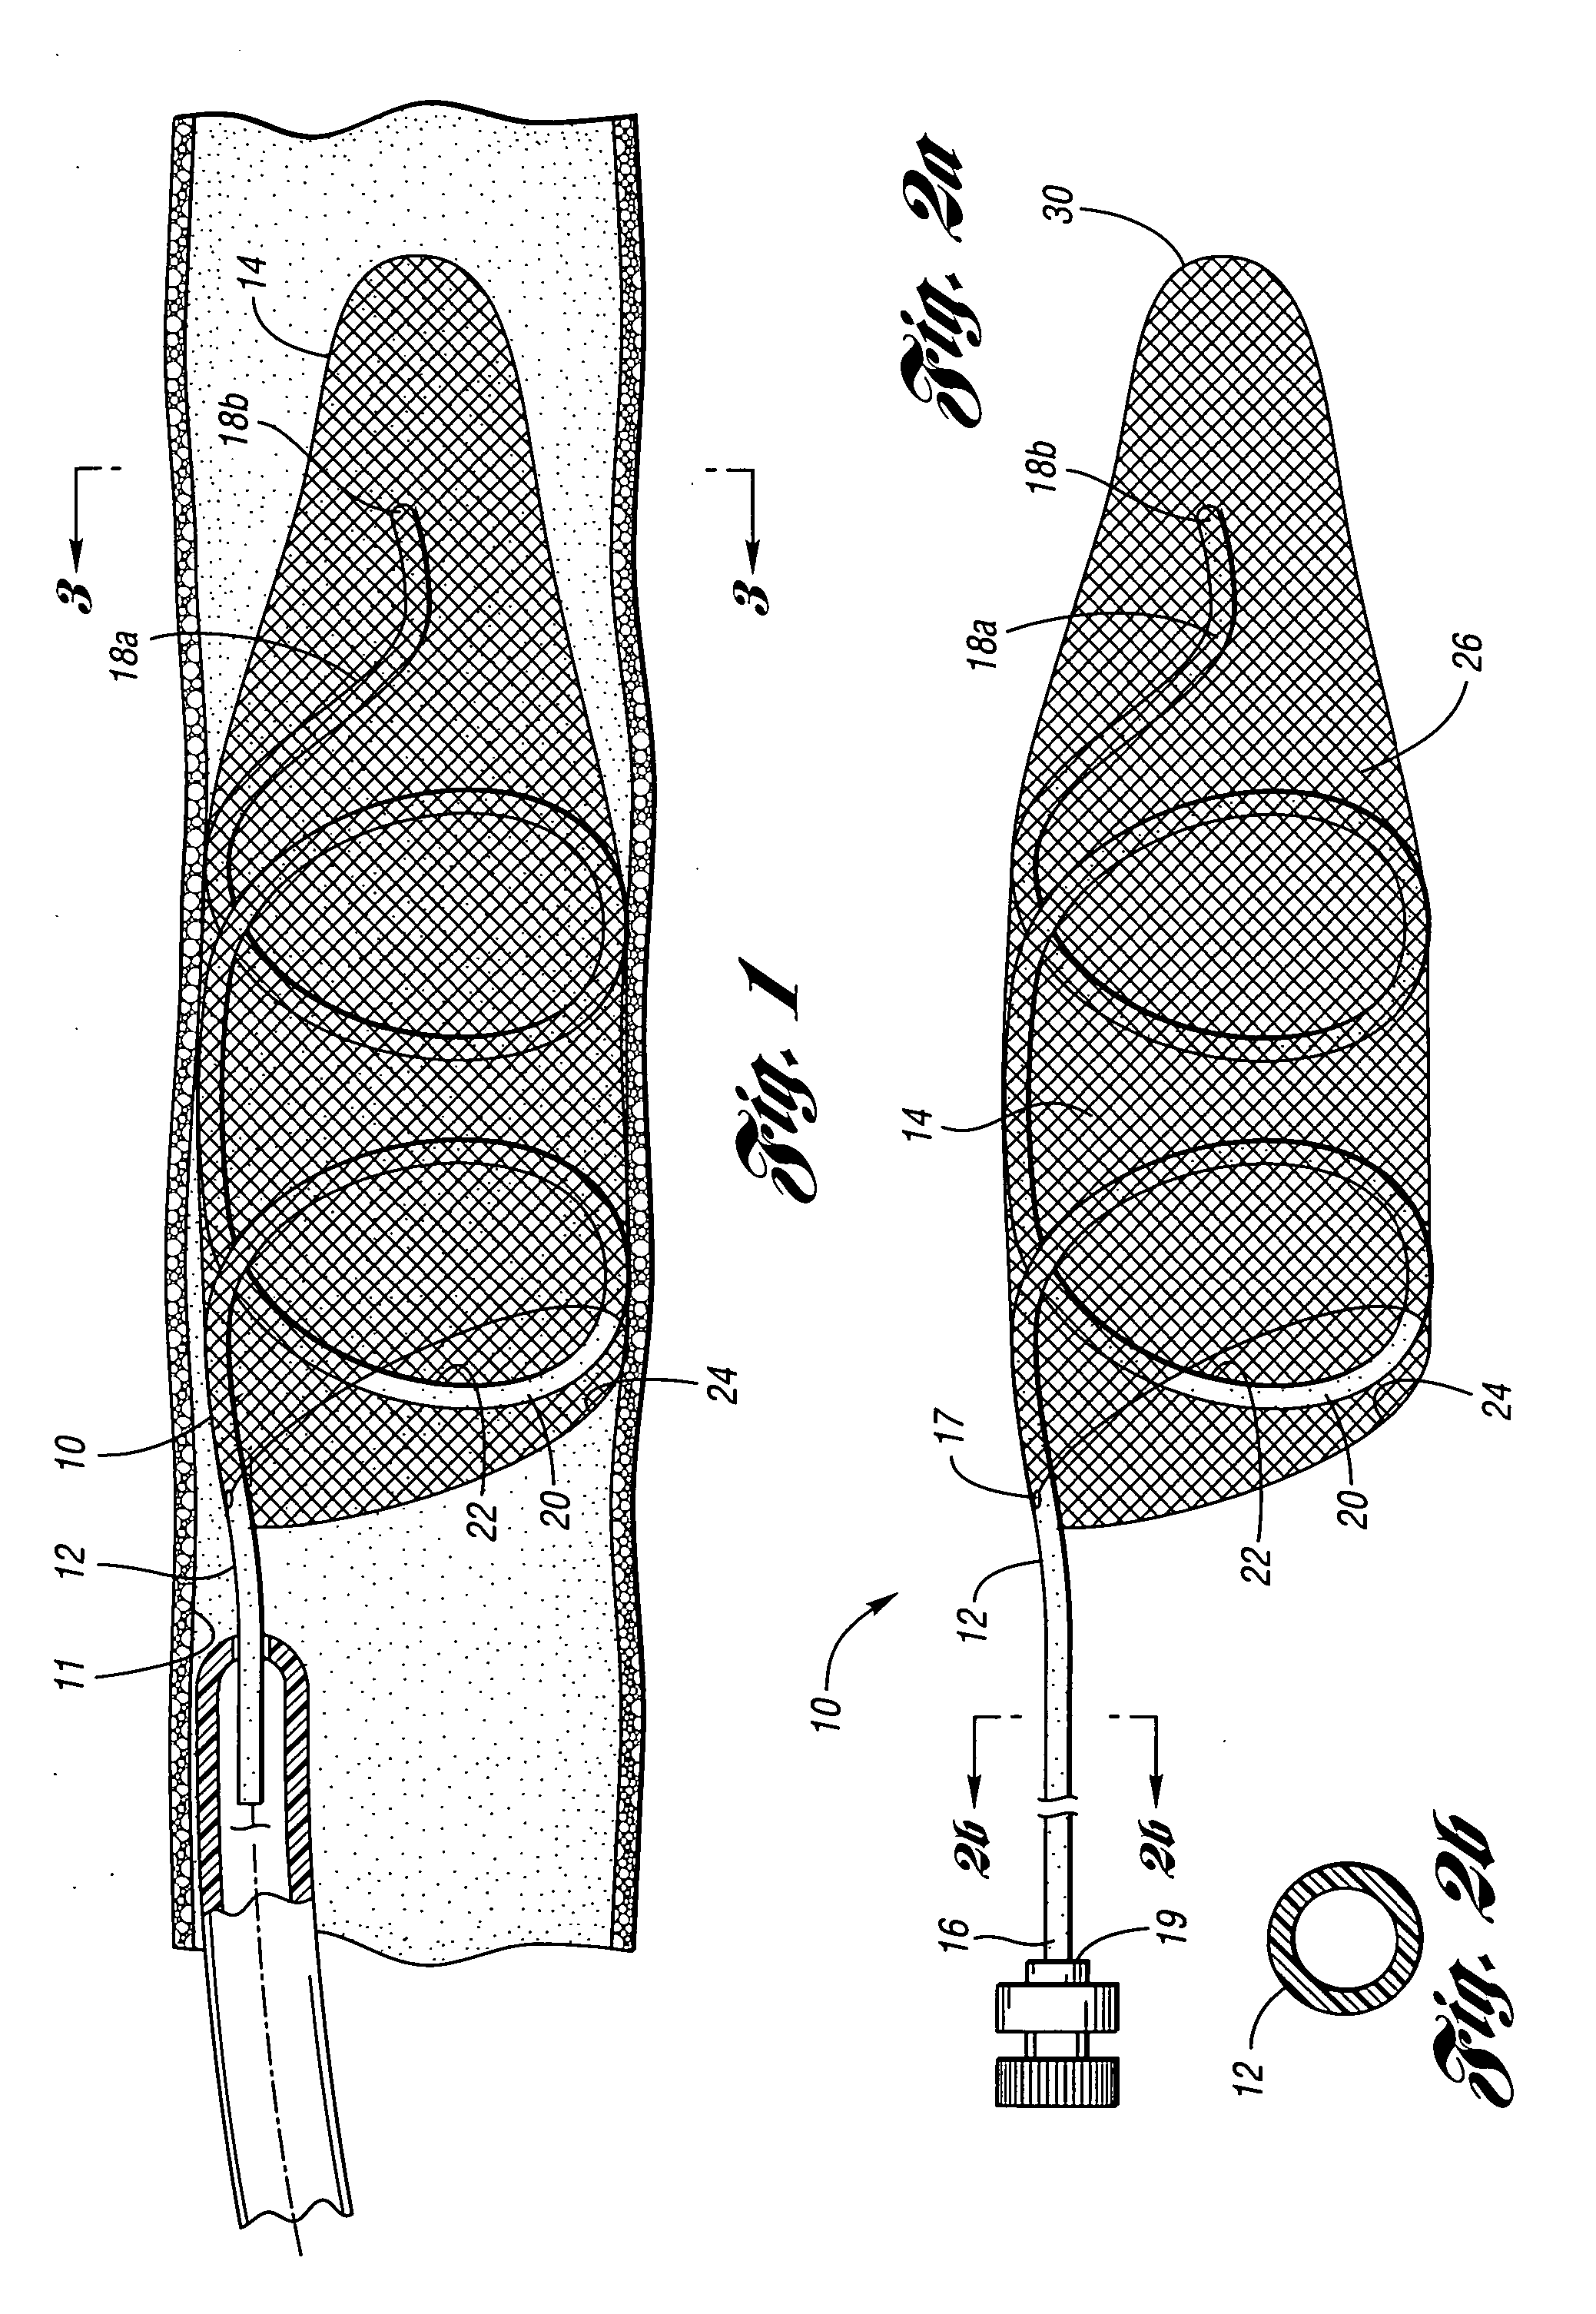 Embolic protection device having inflatable frame